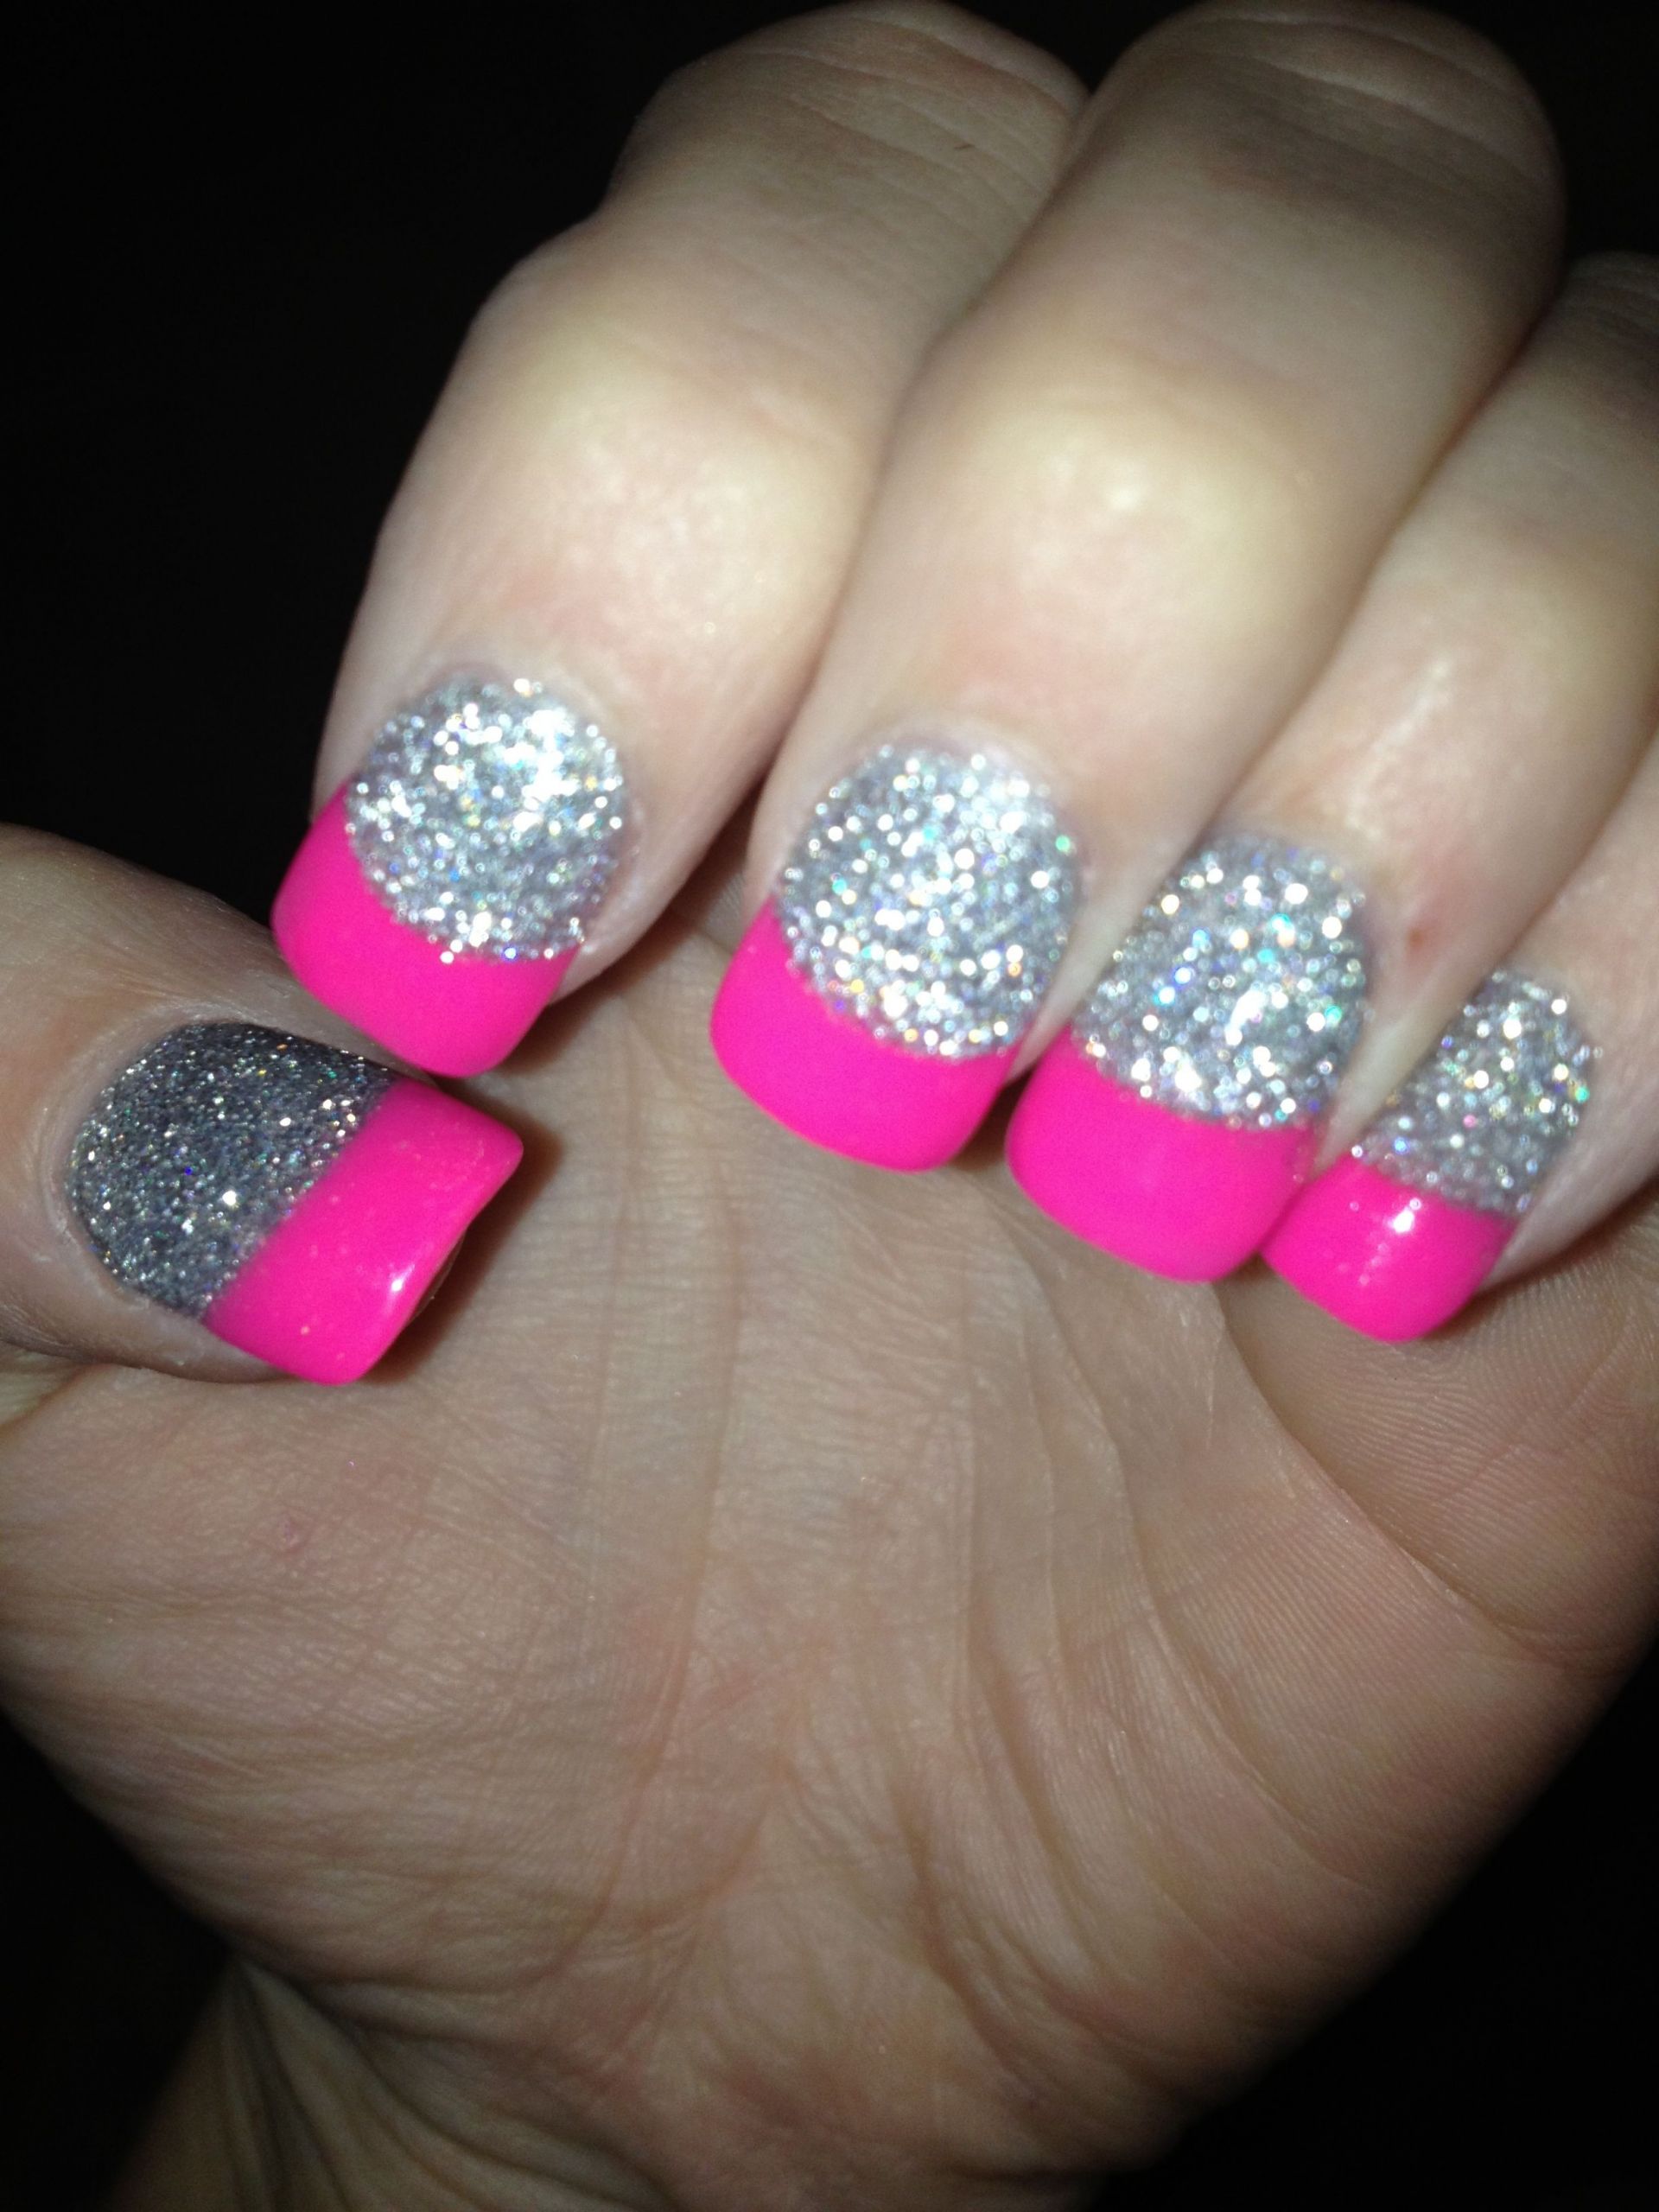 Hot Pink Nails With Glitter
 Hot Pink & Glitter Solar Nails